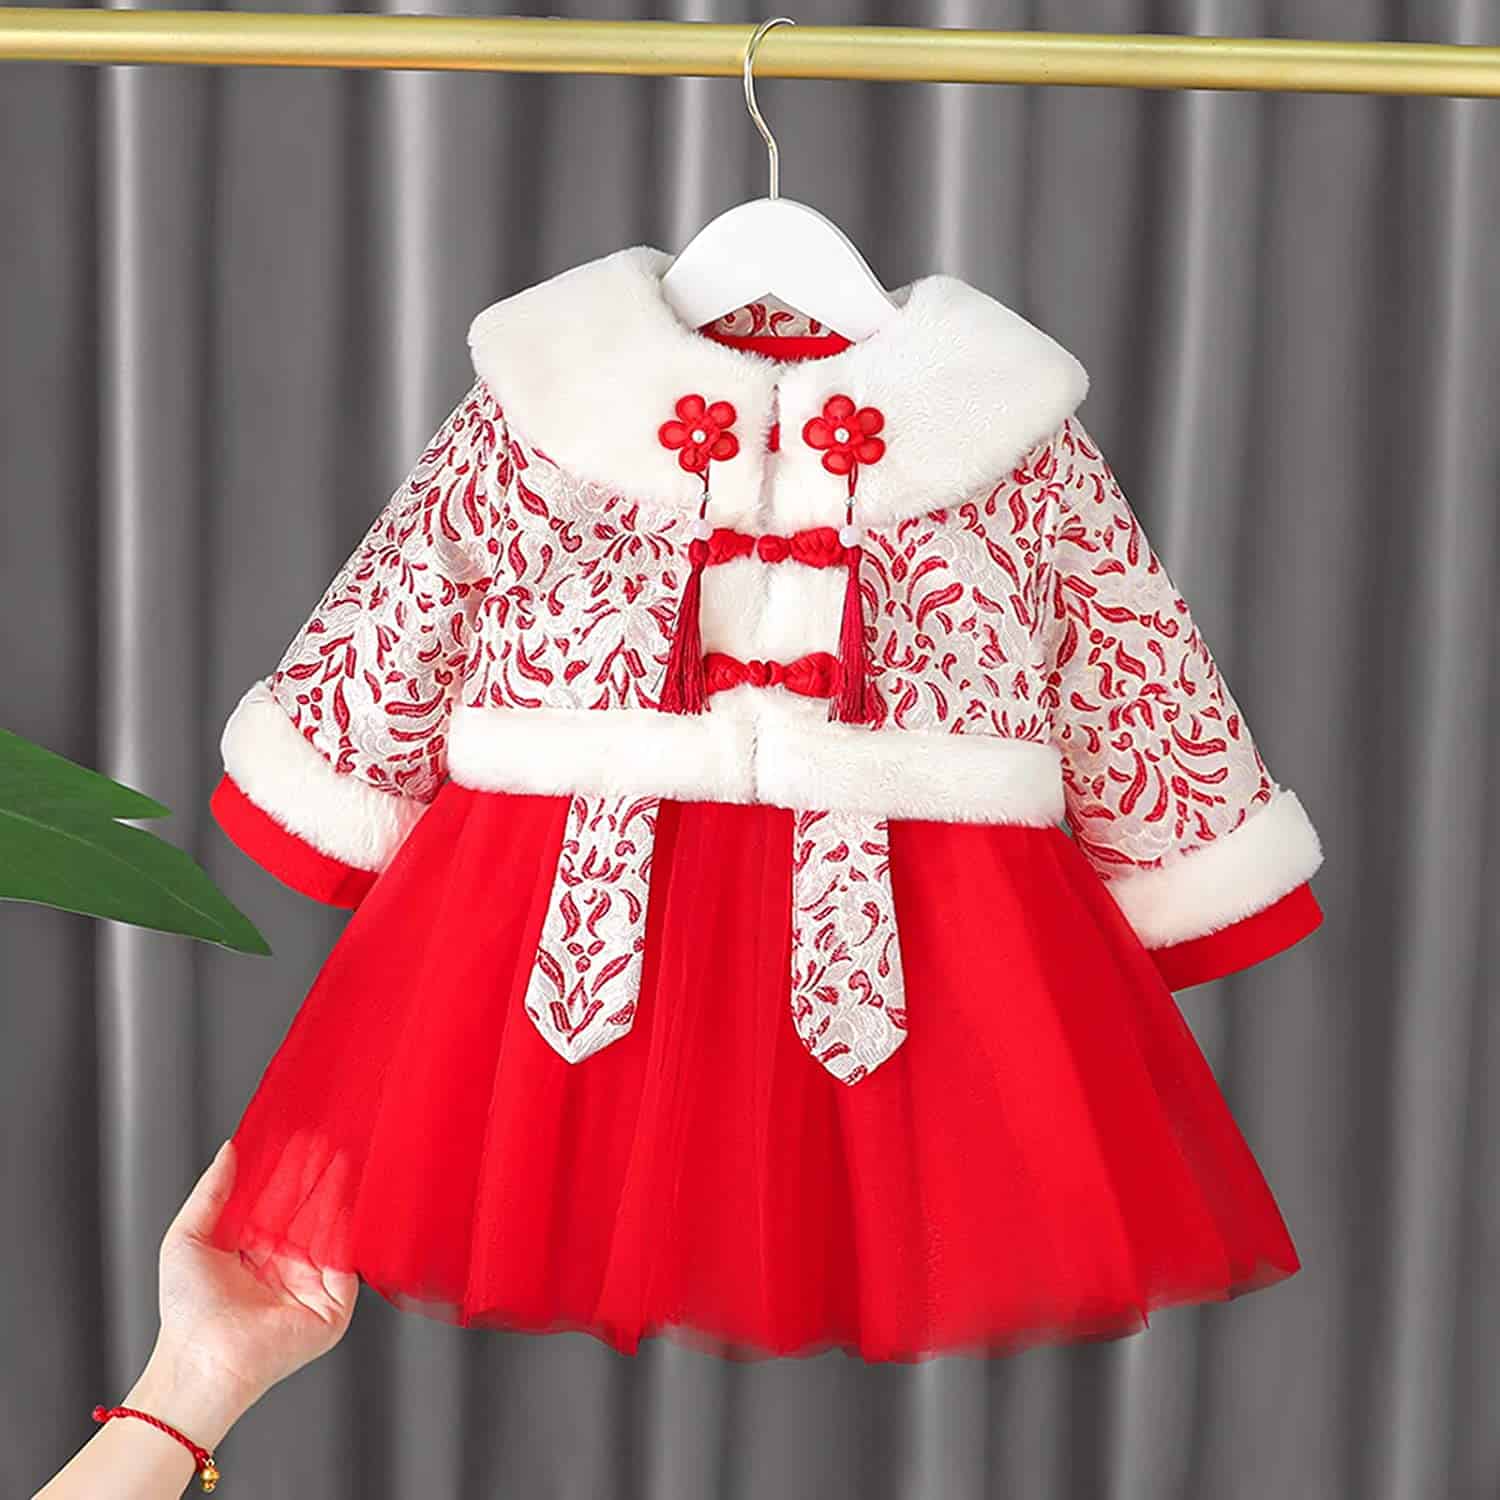 Latest Winter Dresses For Baby Girl In Pakistan